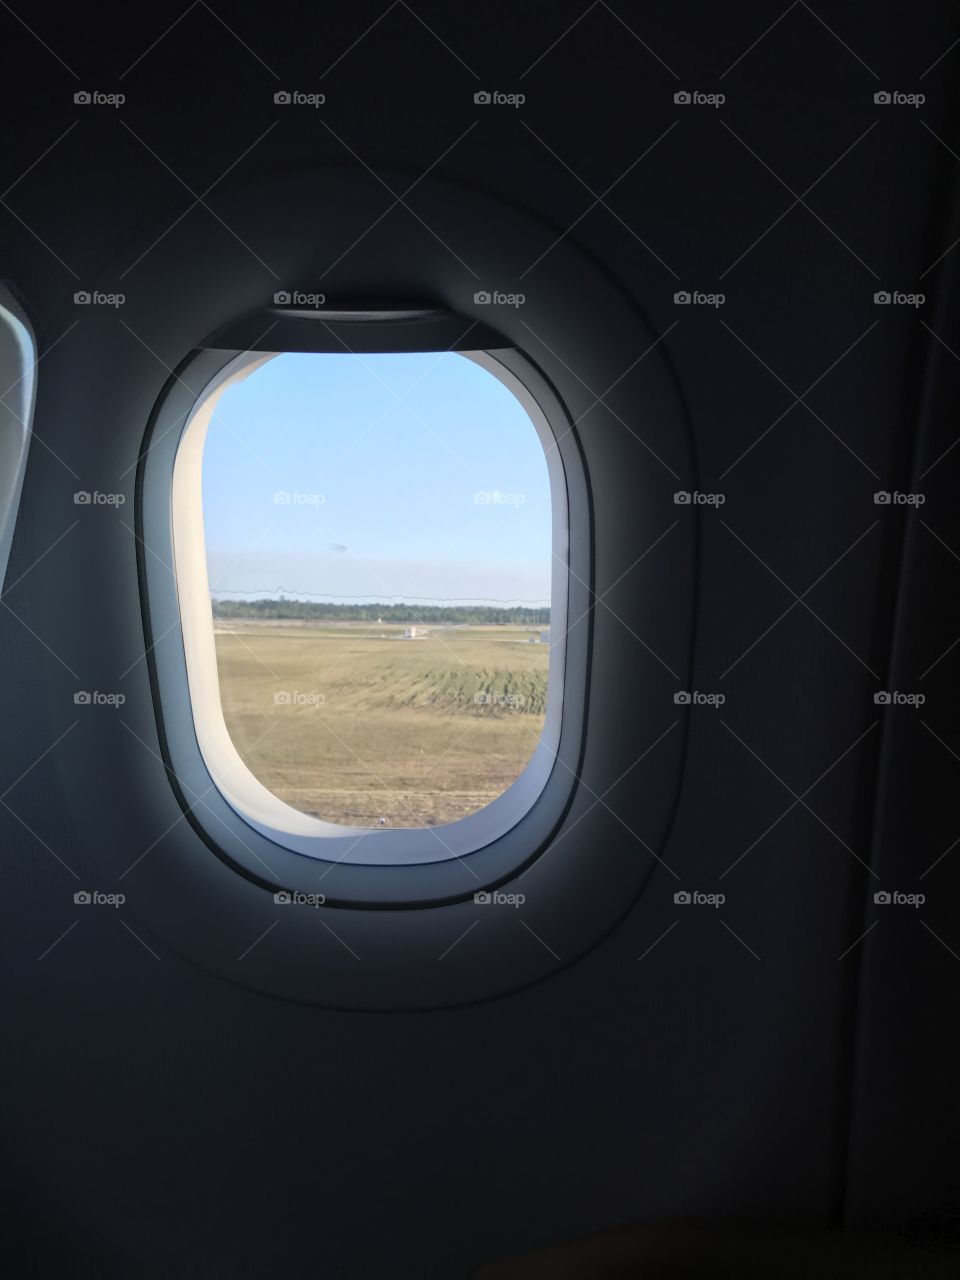 A view through my window. Airplane rides are the best. Airliner, window, horizon, daylight, peace, peaceful, flight, travel, plane, landing, landscape 